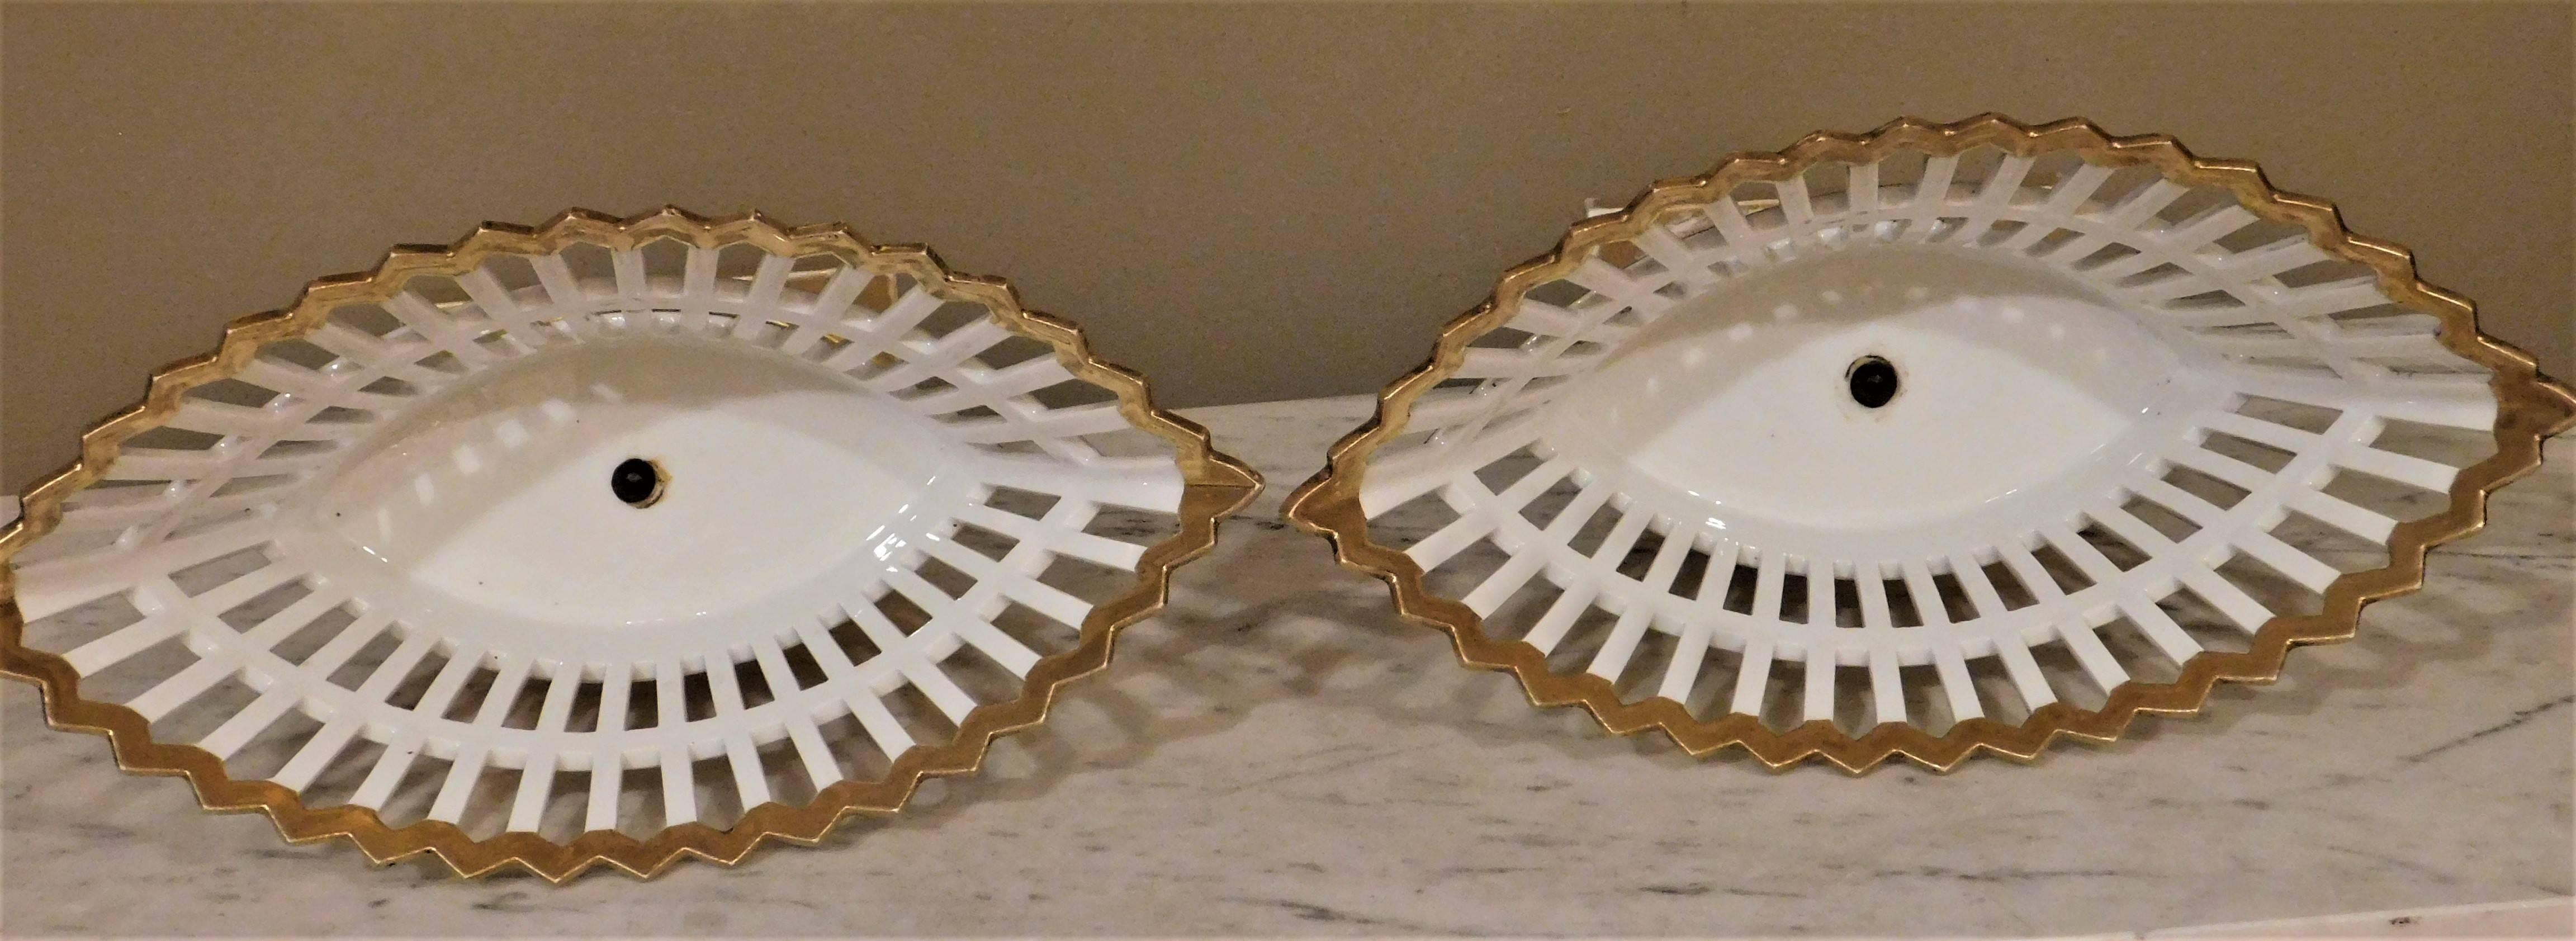 French Pair of Old Paris Reticulated Porcelain Compotes, Paris, circa 1825